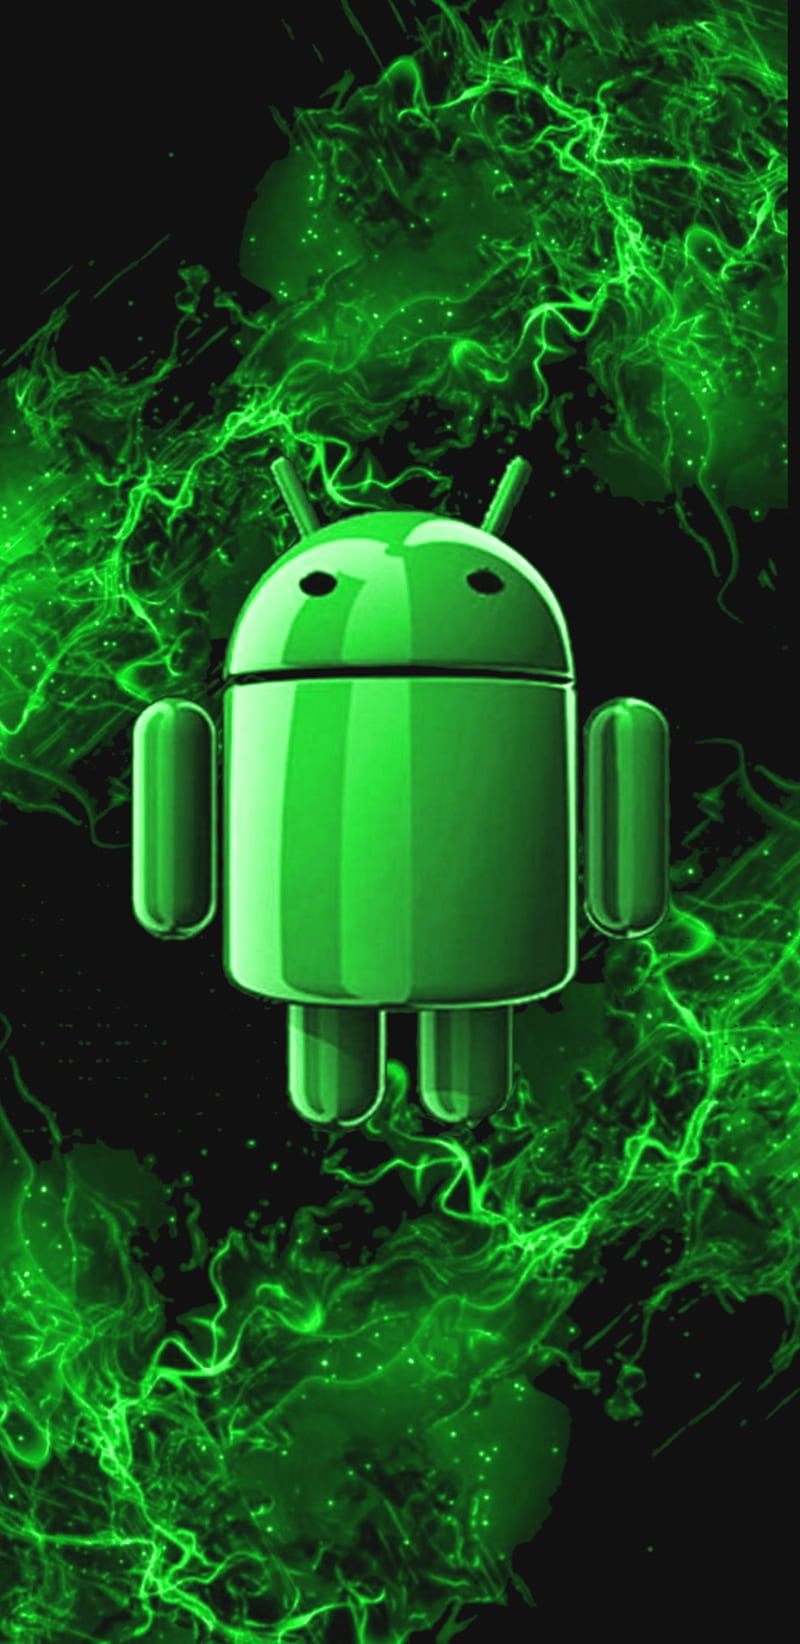 1080P free download | Space droid 2, green, android, HD phone wallpaper ...